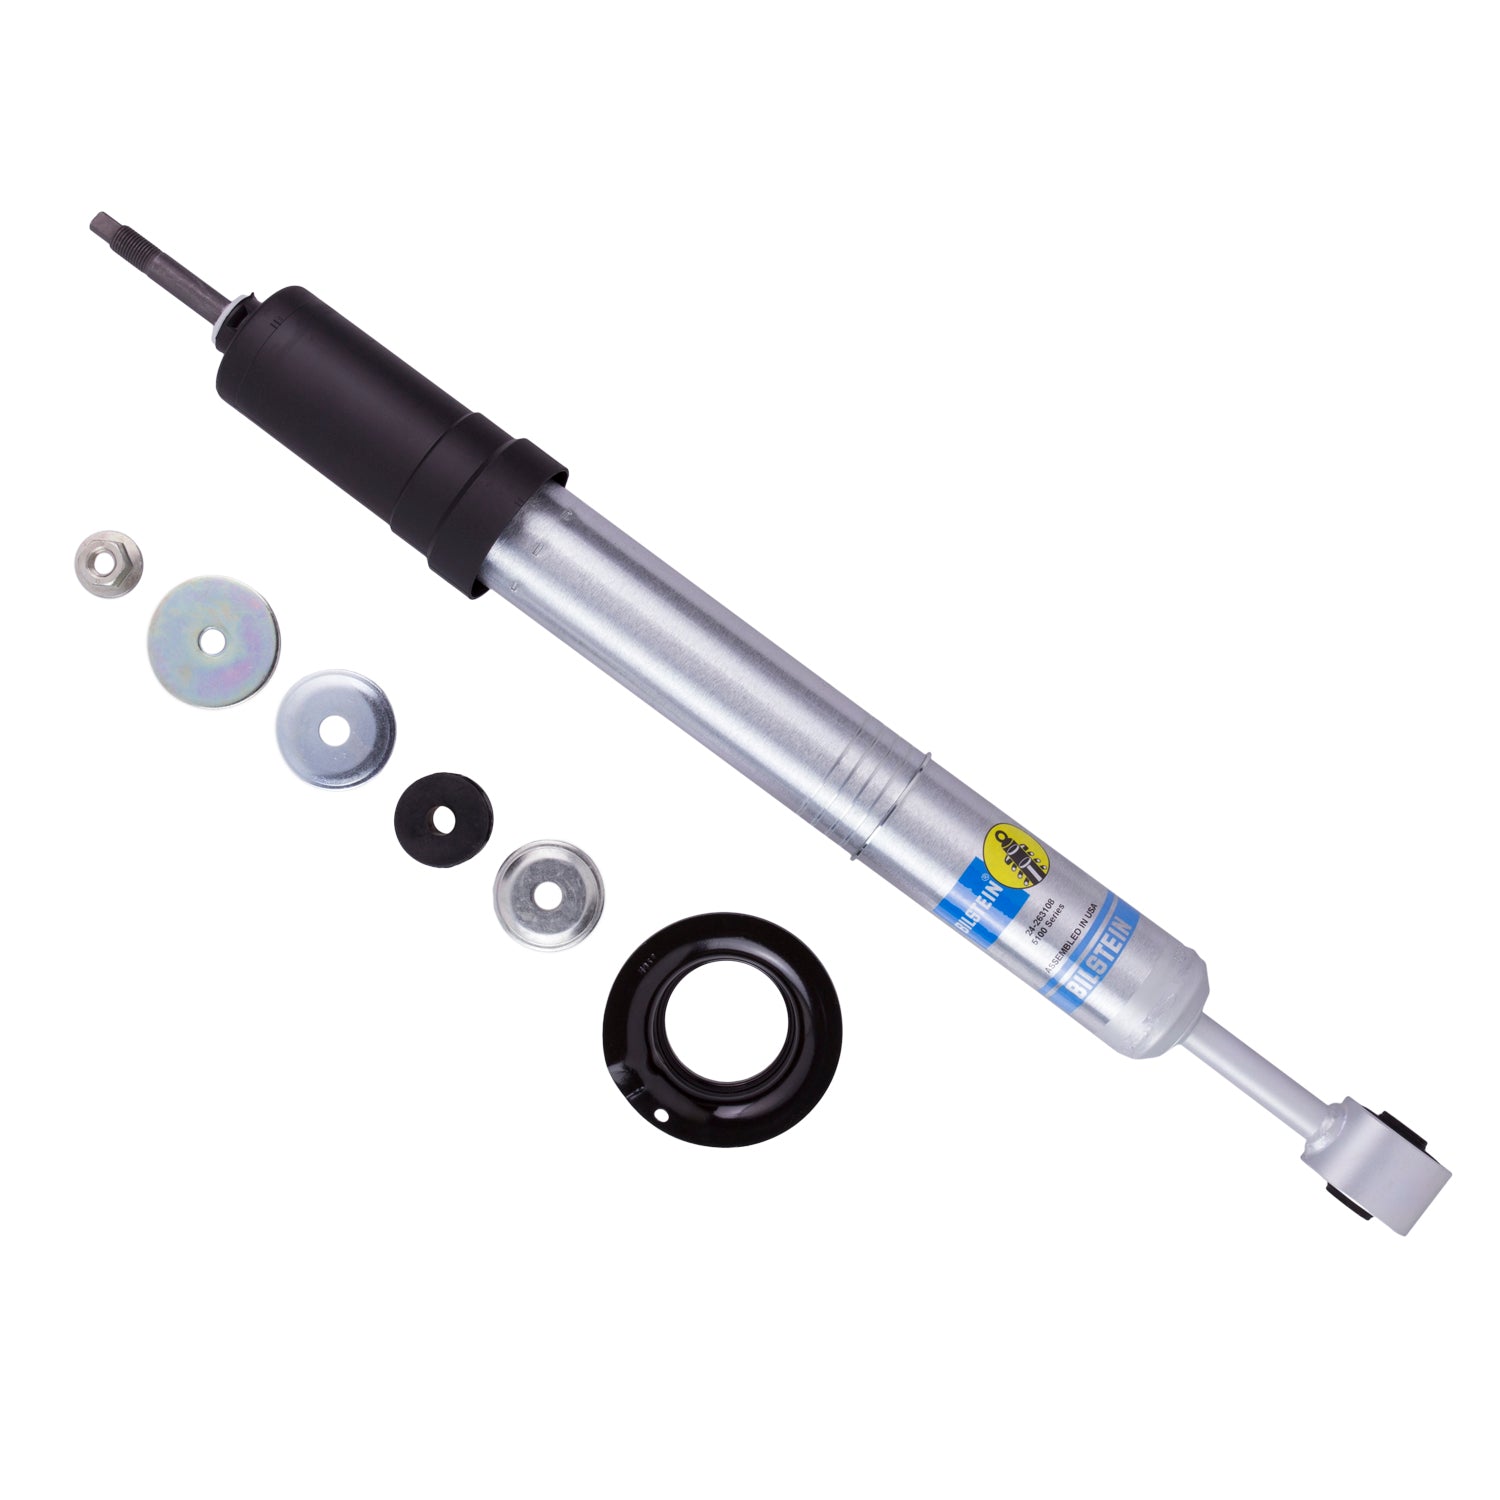 Bilstein - 5100 Front (Ride Height Adjustable) - Shock Absorber - Toyota Tacoma (2005-2023)